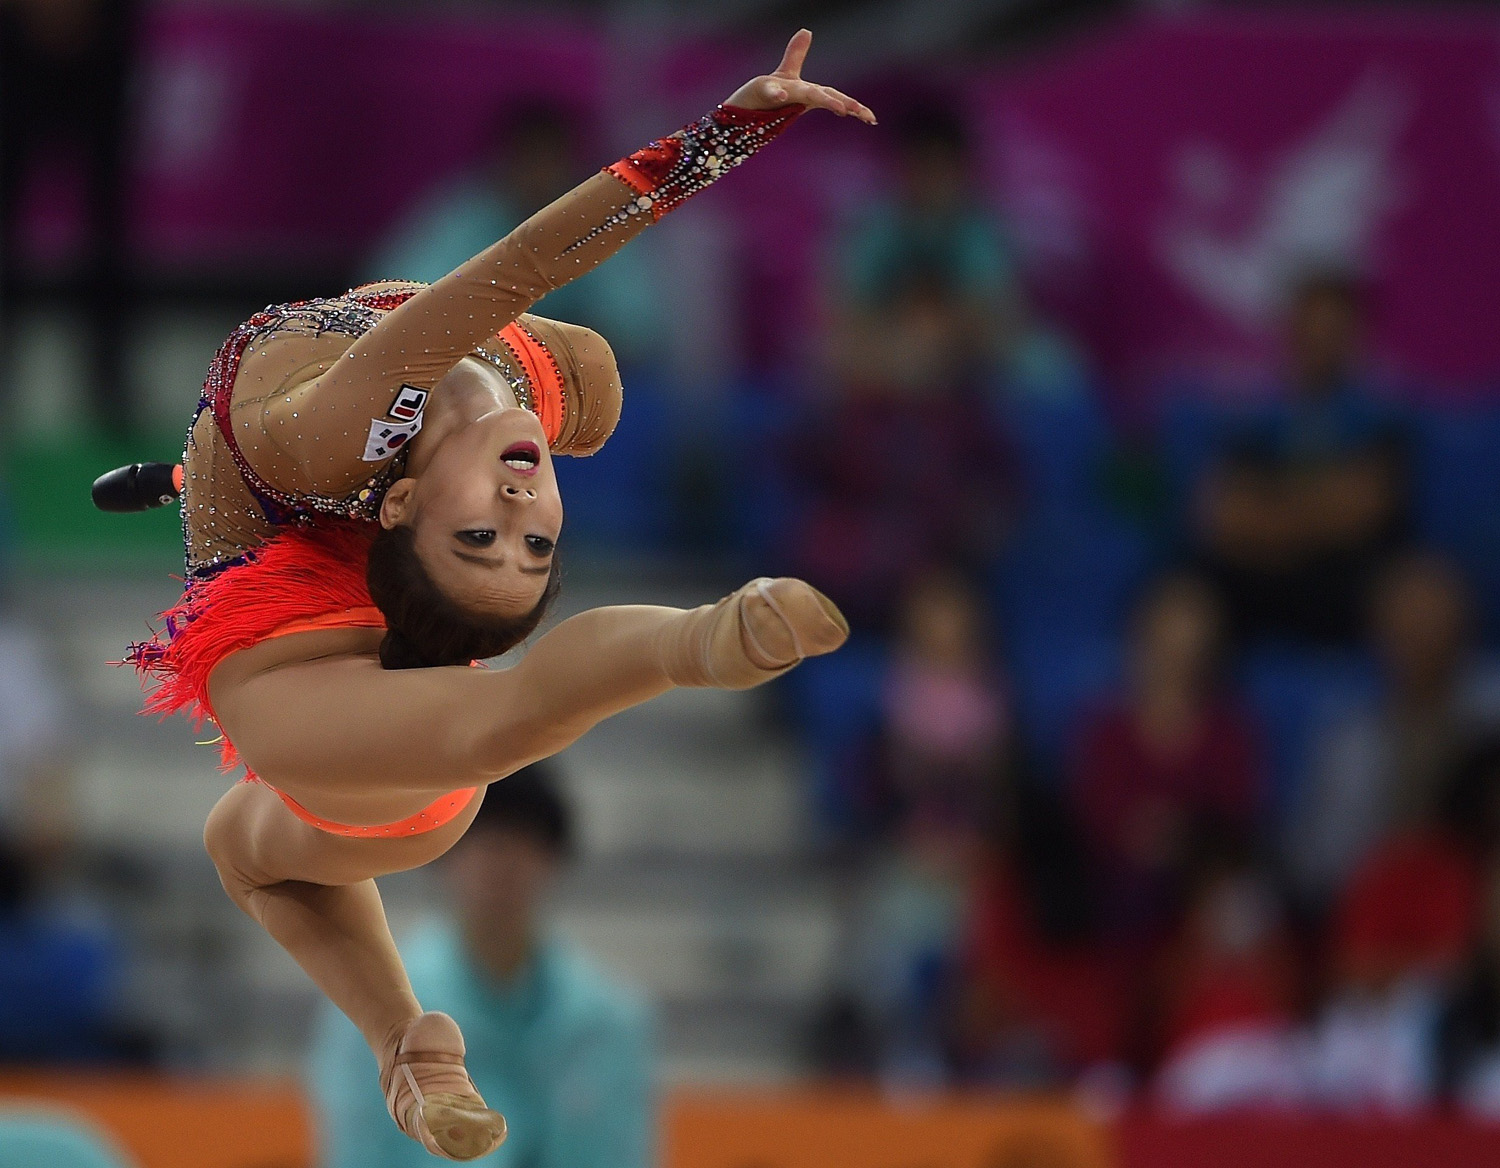 South Korea's Lee Nakyung performs during the women's rythmic gymnastics team event of the 2014 Asian Games at the Seonhak Gymnasium in Incheon, South Korea on October 1, 2014.